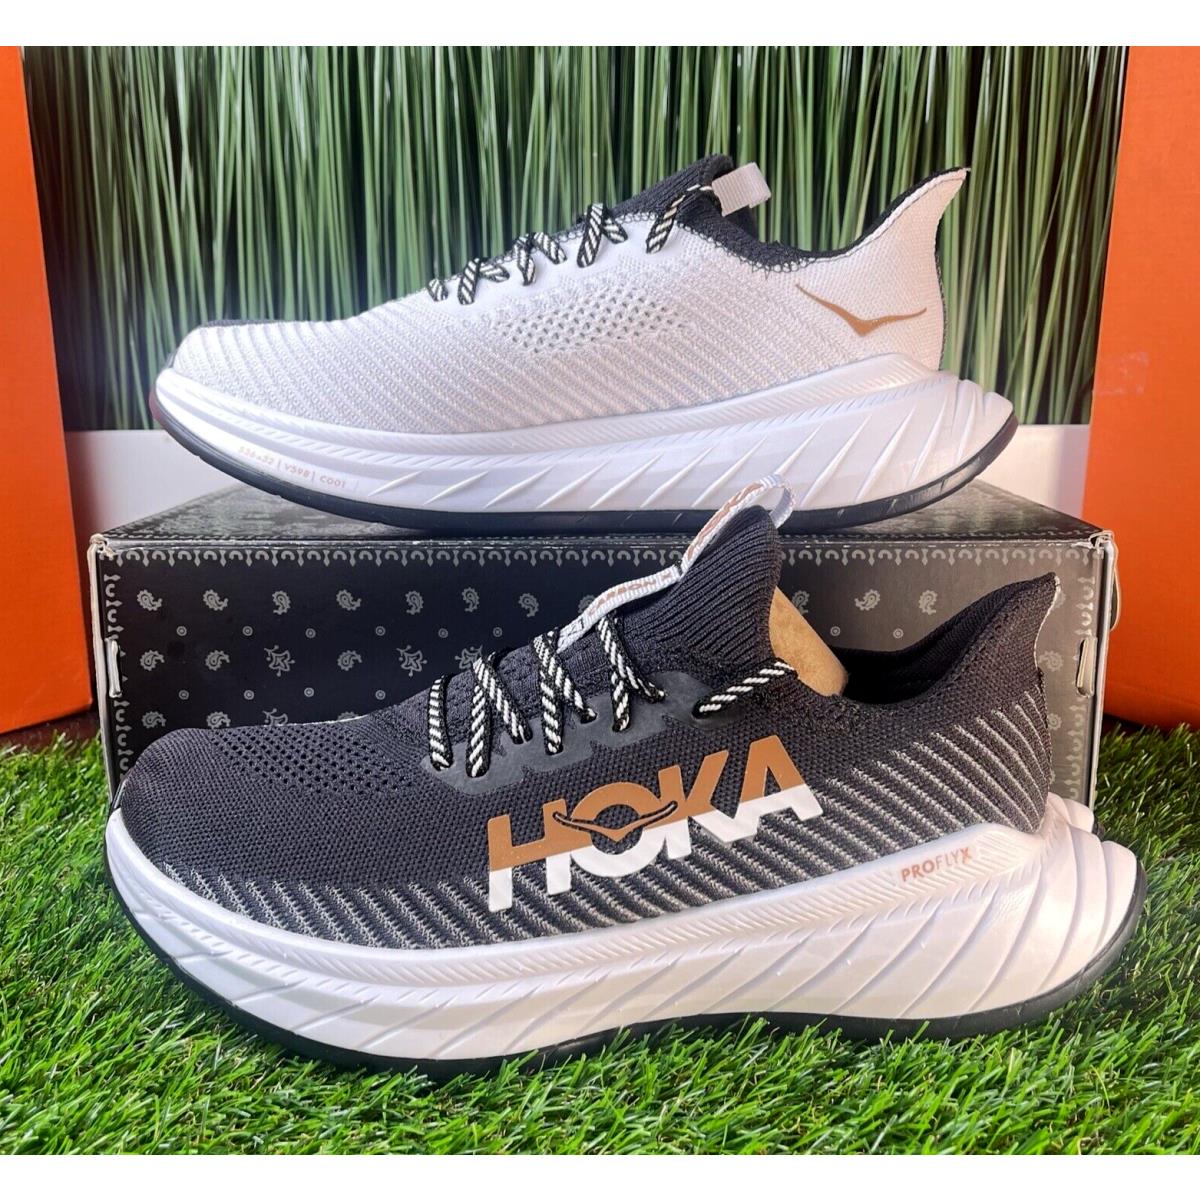 Hoka One One Carbon X 3 Womens Running Shoes Black White Size 10